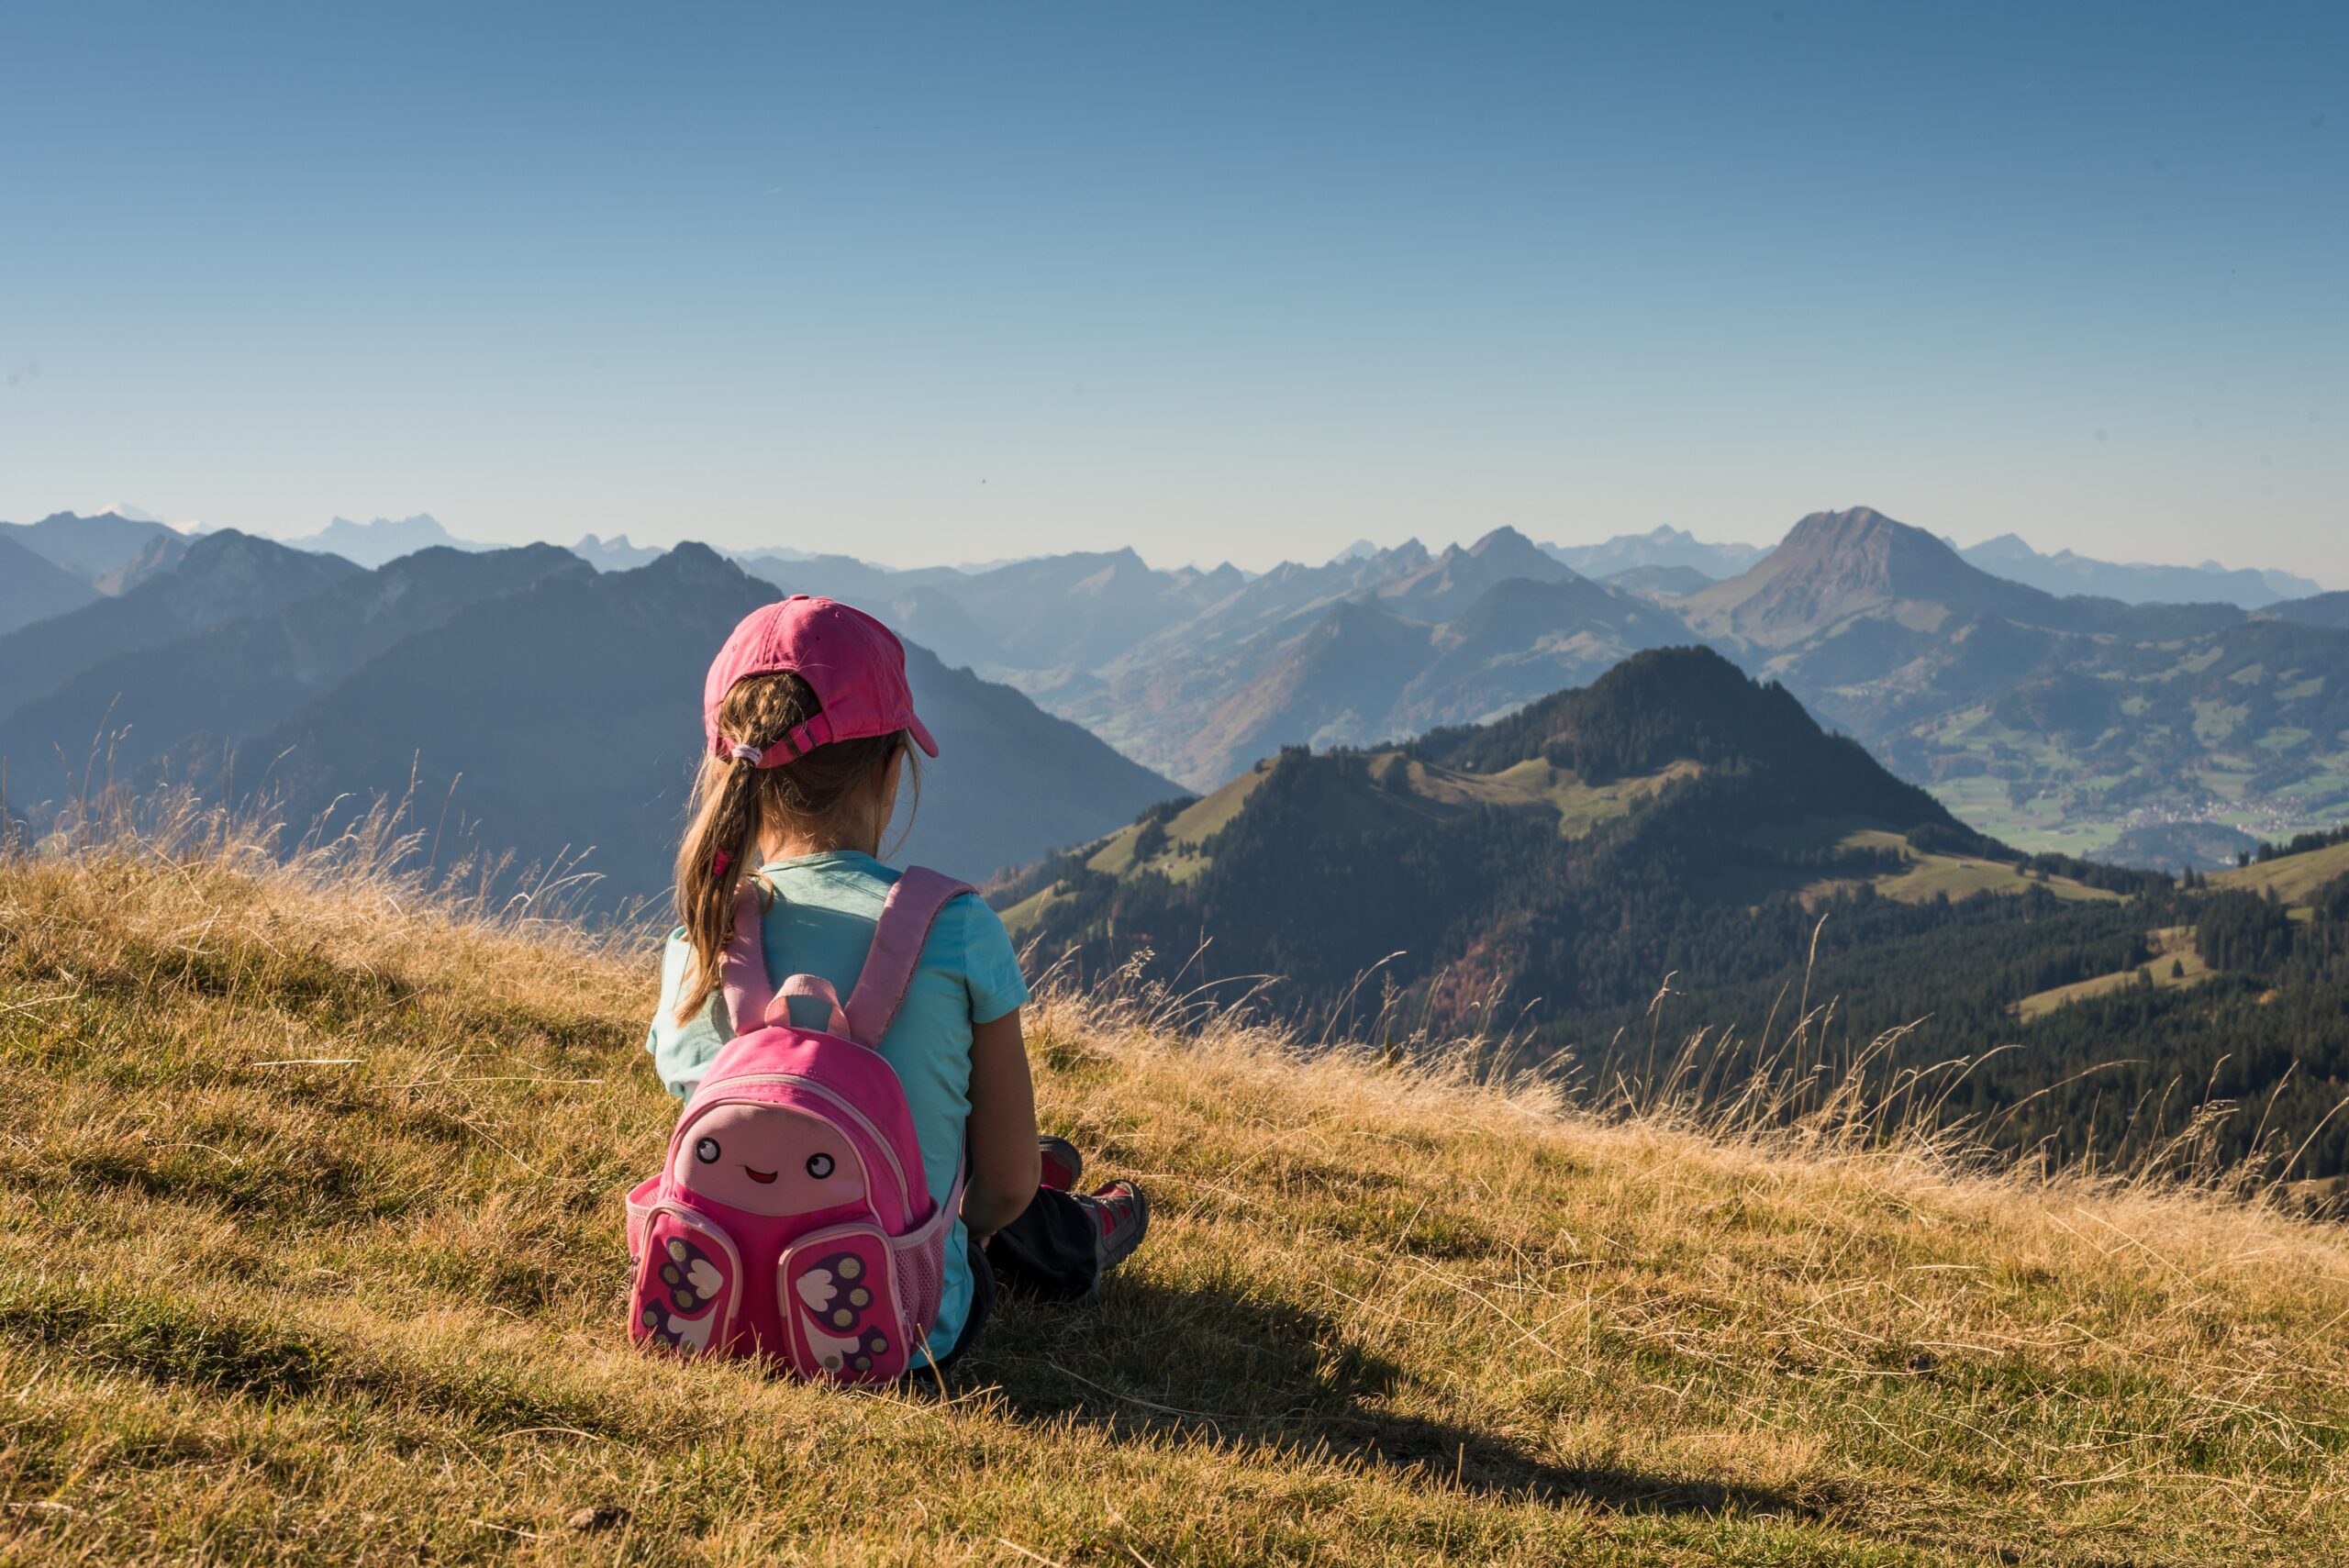 Can Young Children Go Hiking In National Parks?